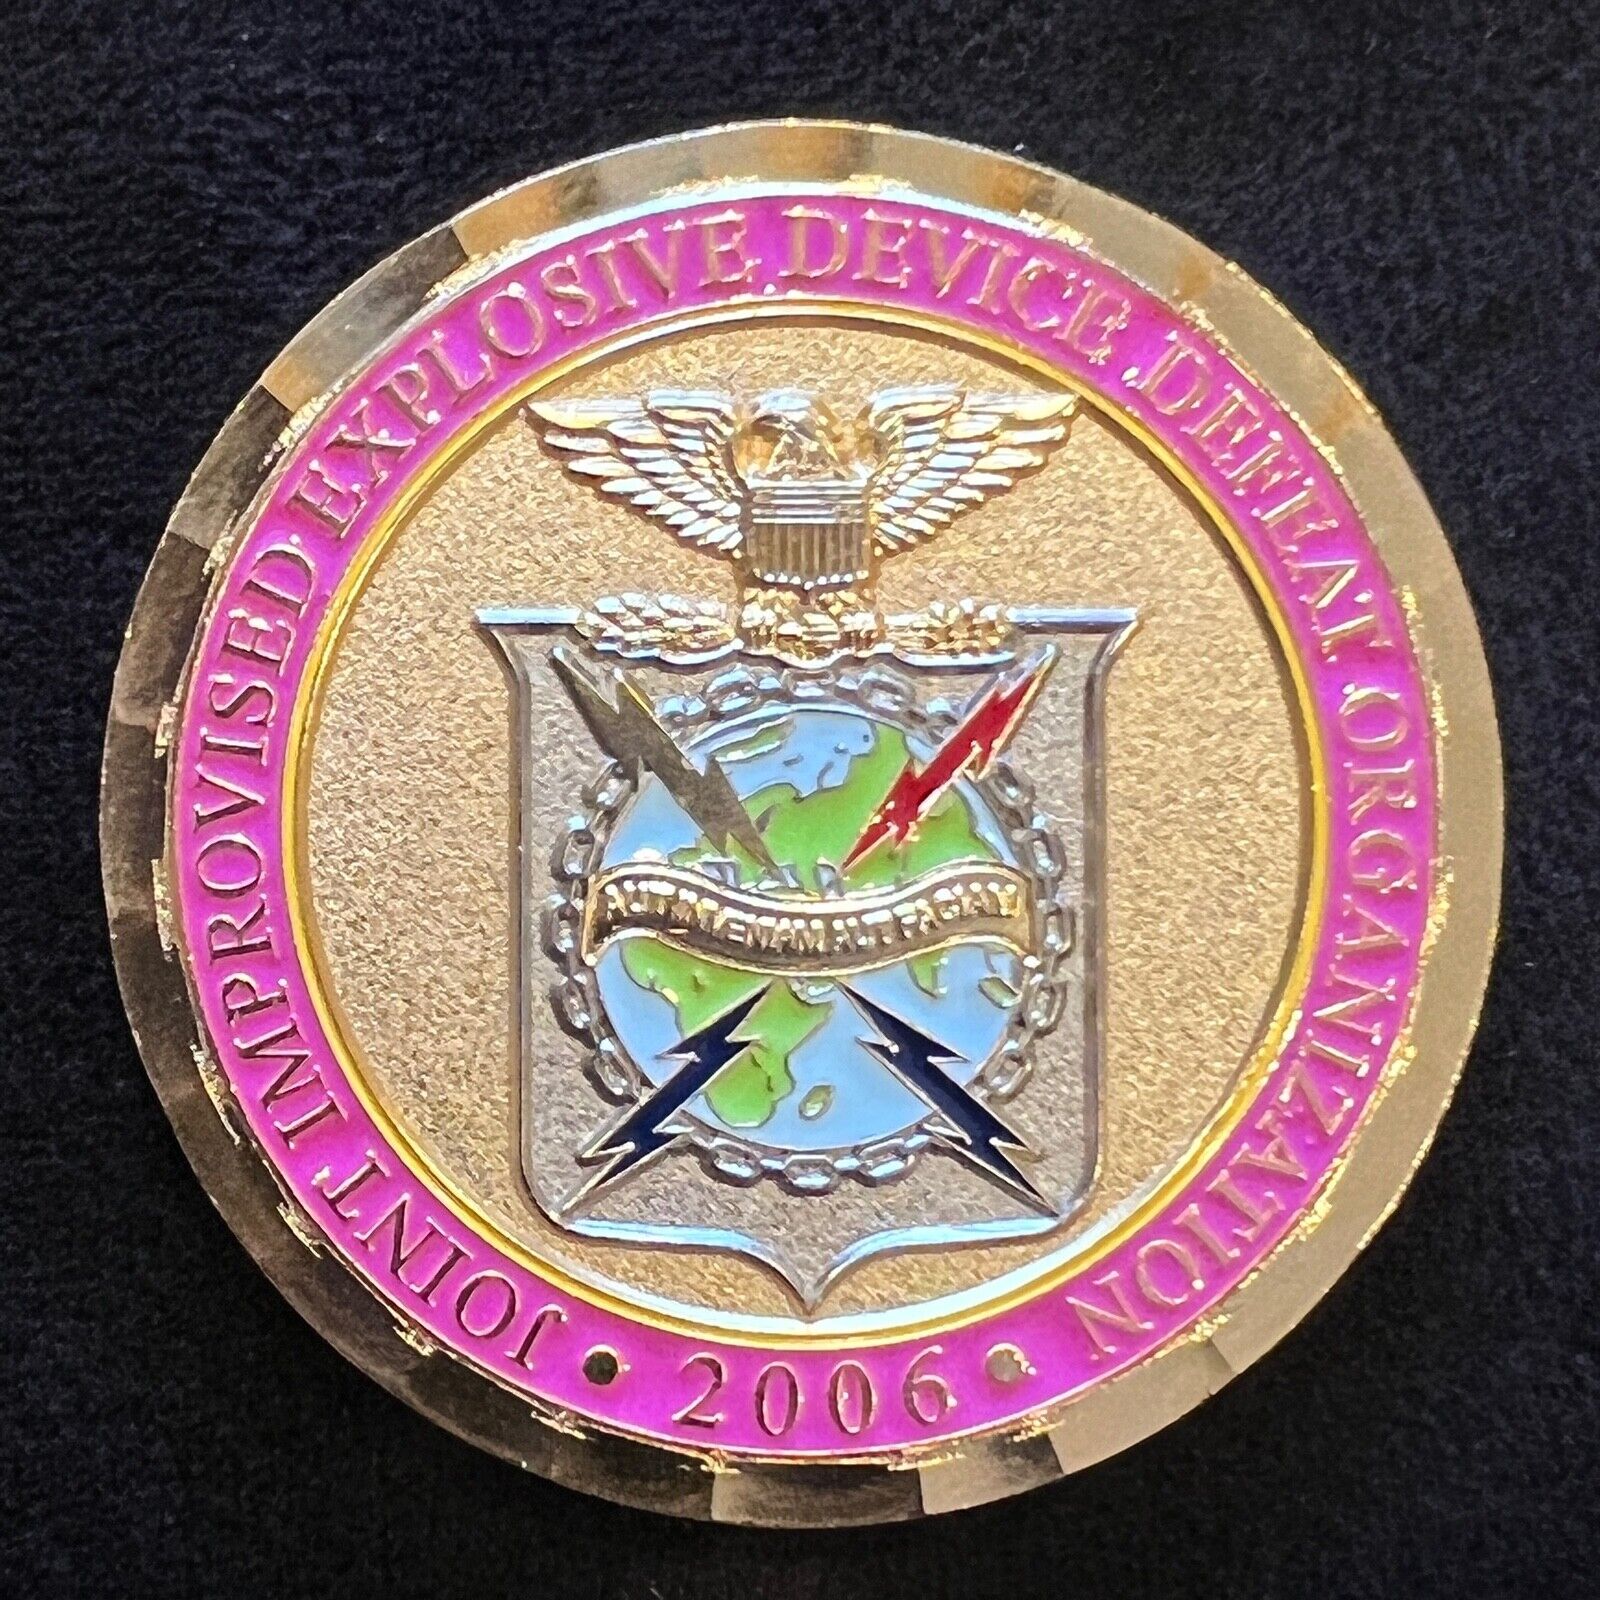 Joint Improvised Explosive Device Defeat Organization Commander Challenge Coin